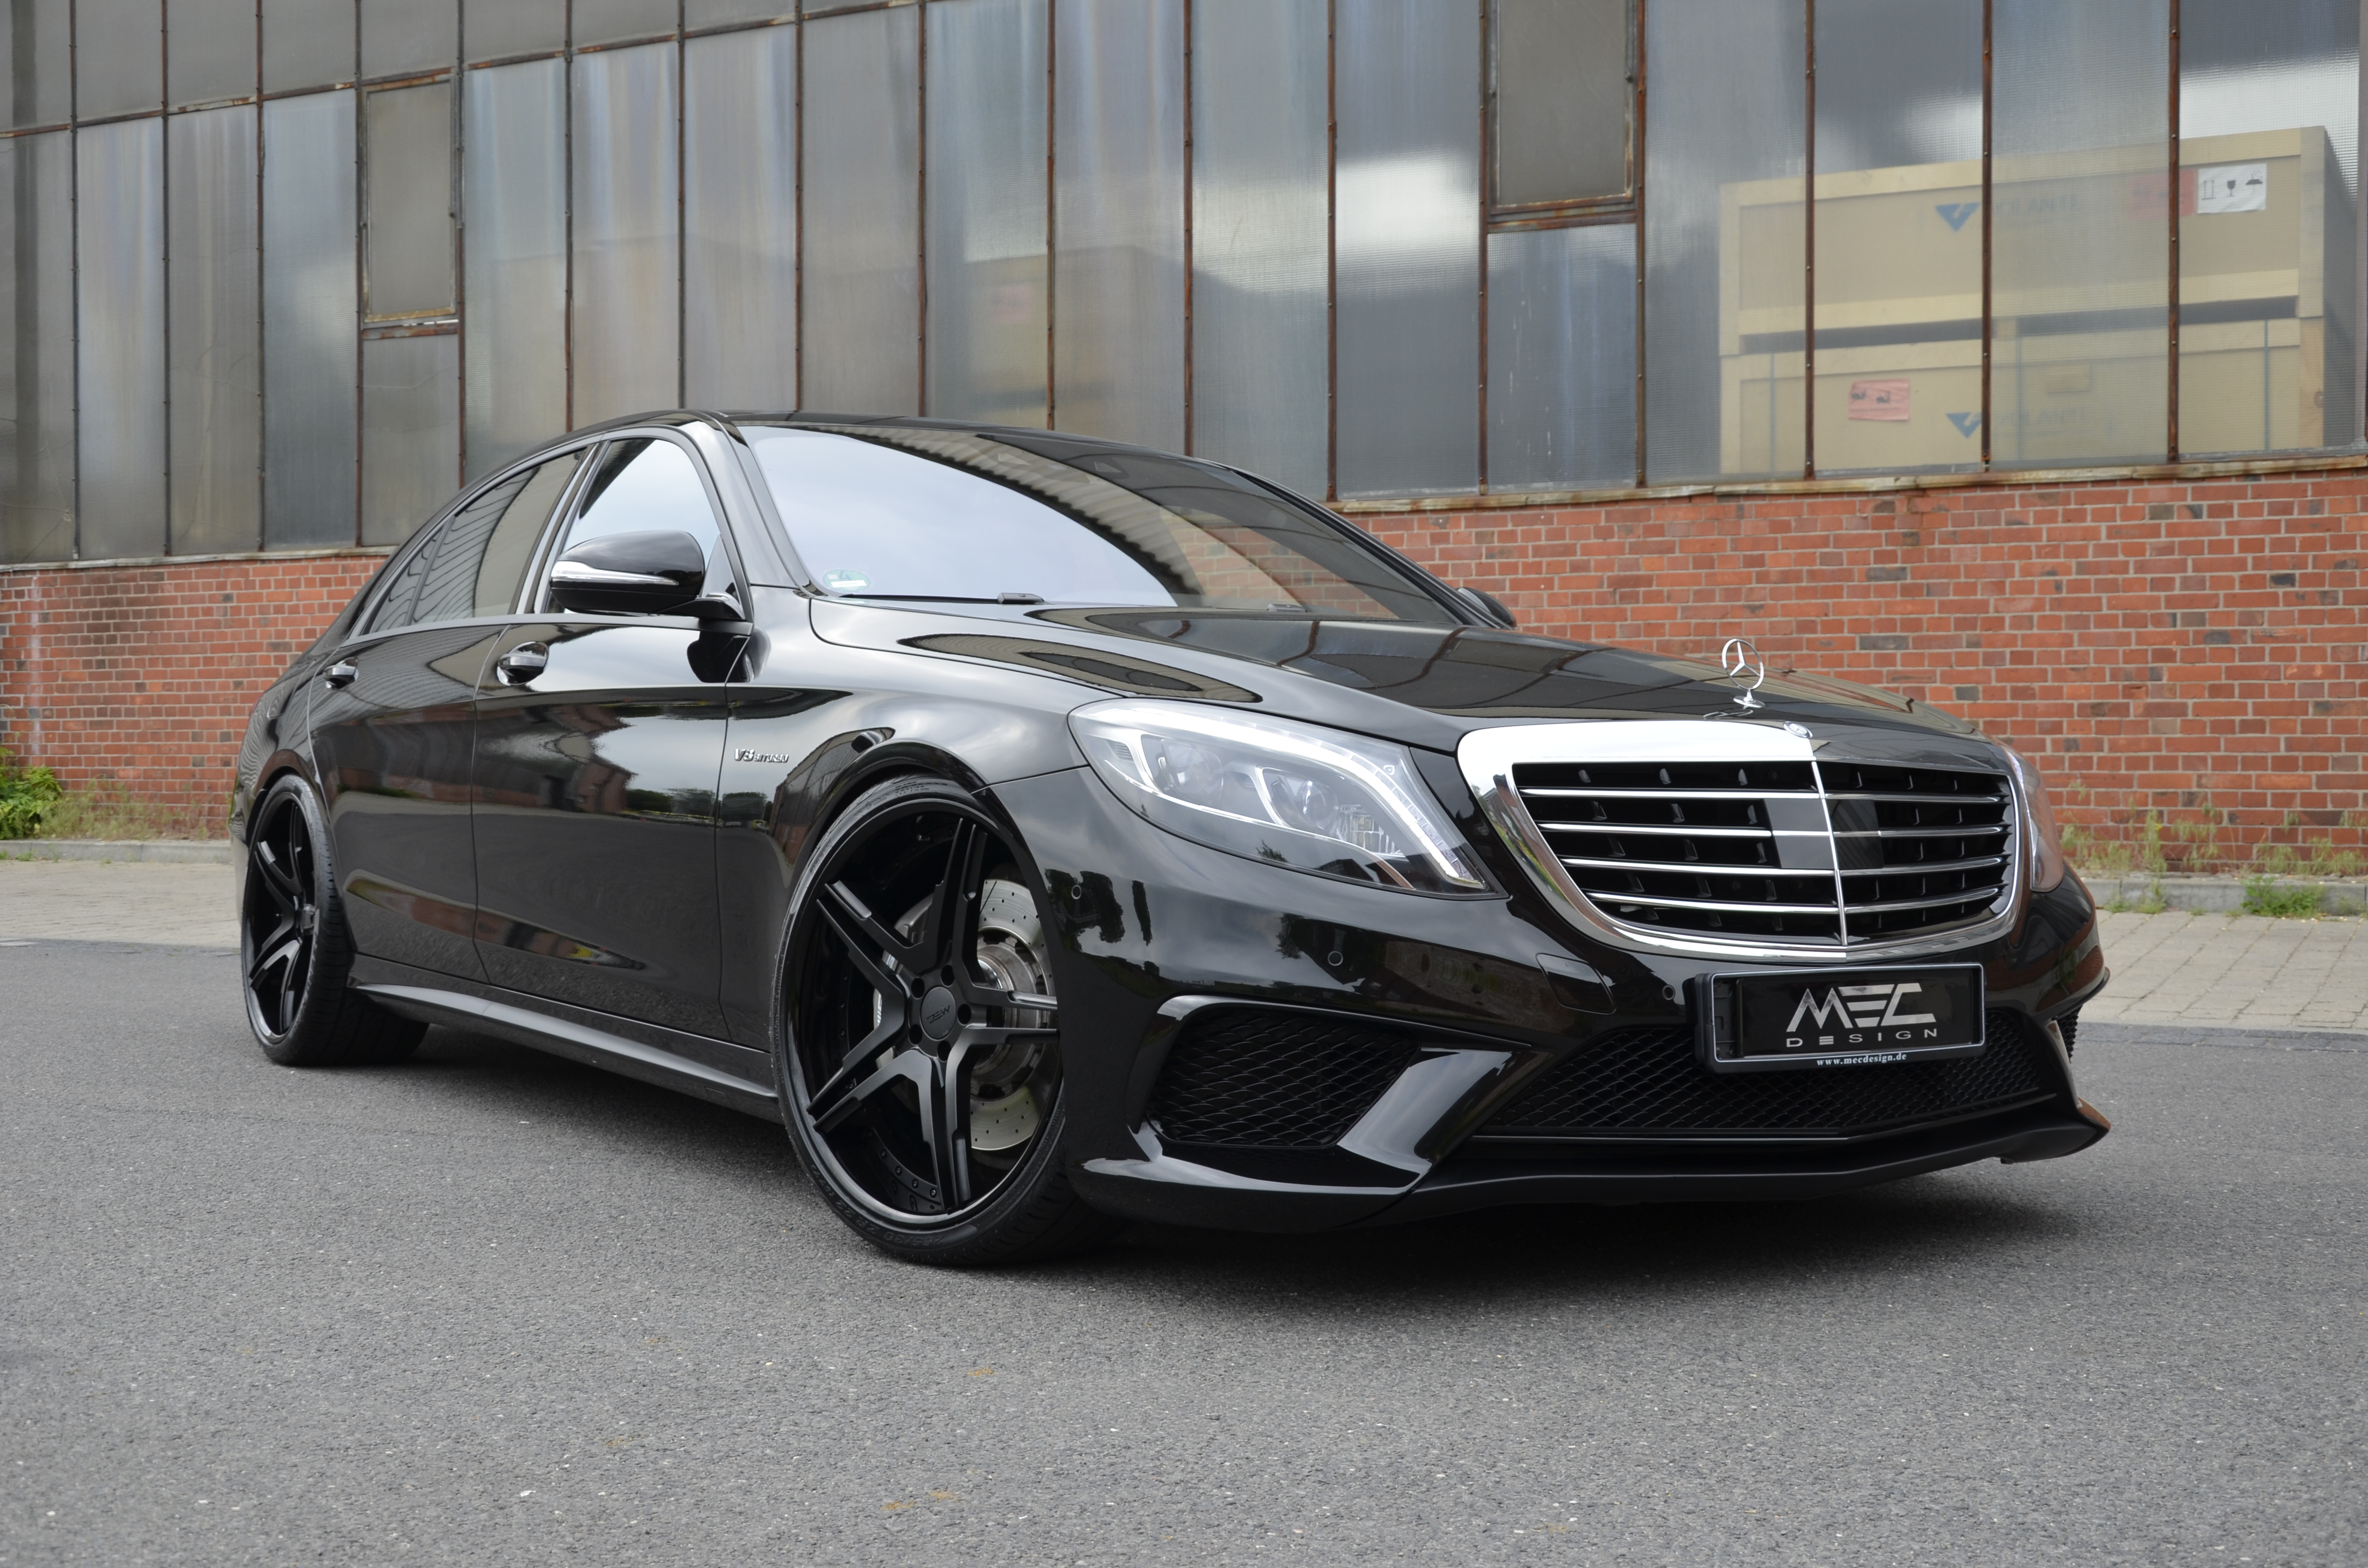 Mercedes S-Class Hybrid (W222) exterior specifications